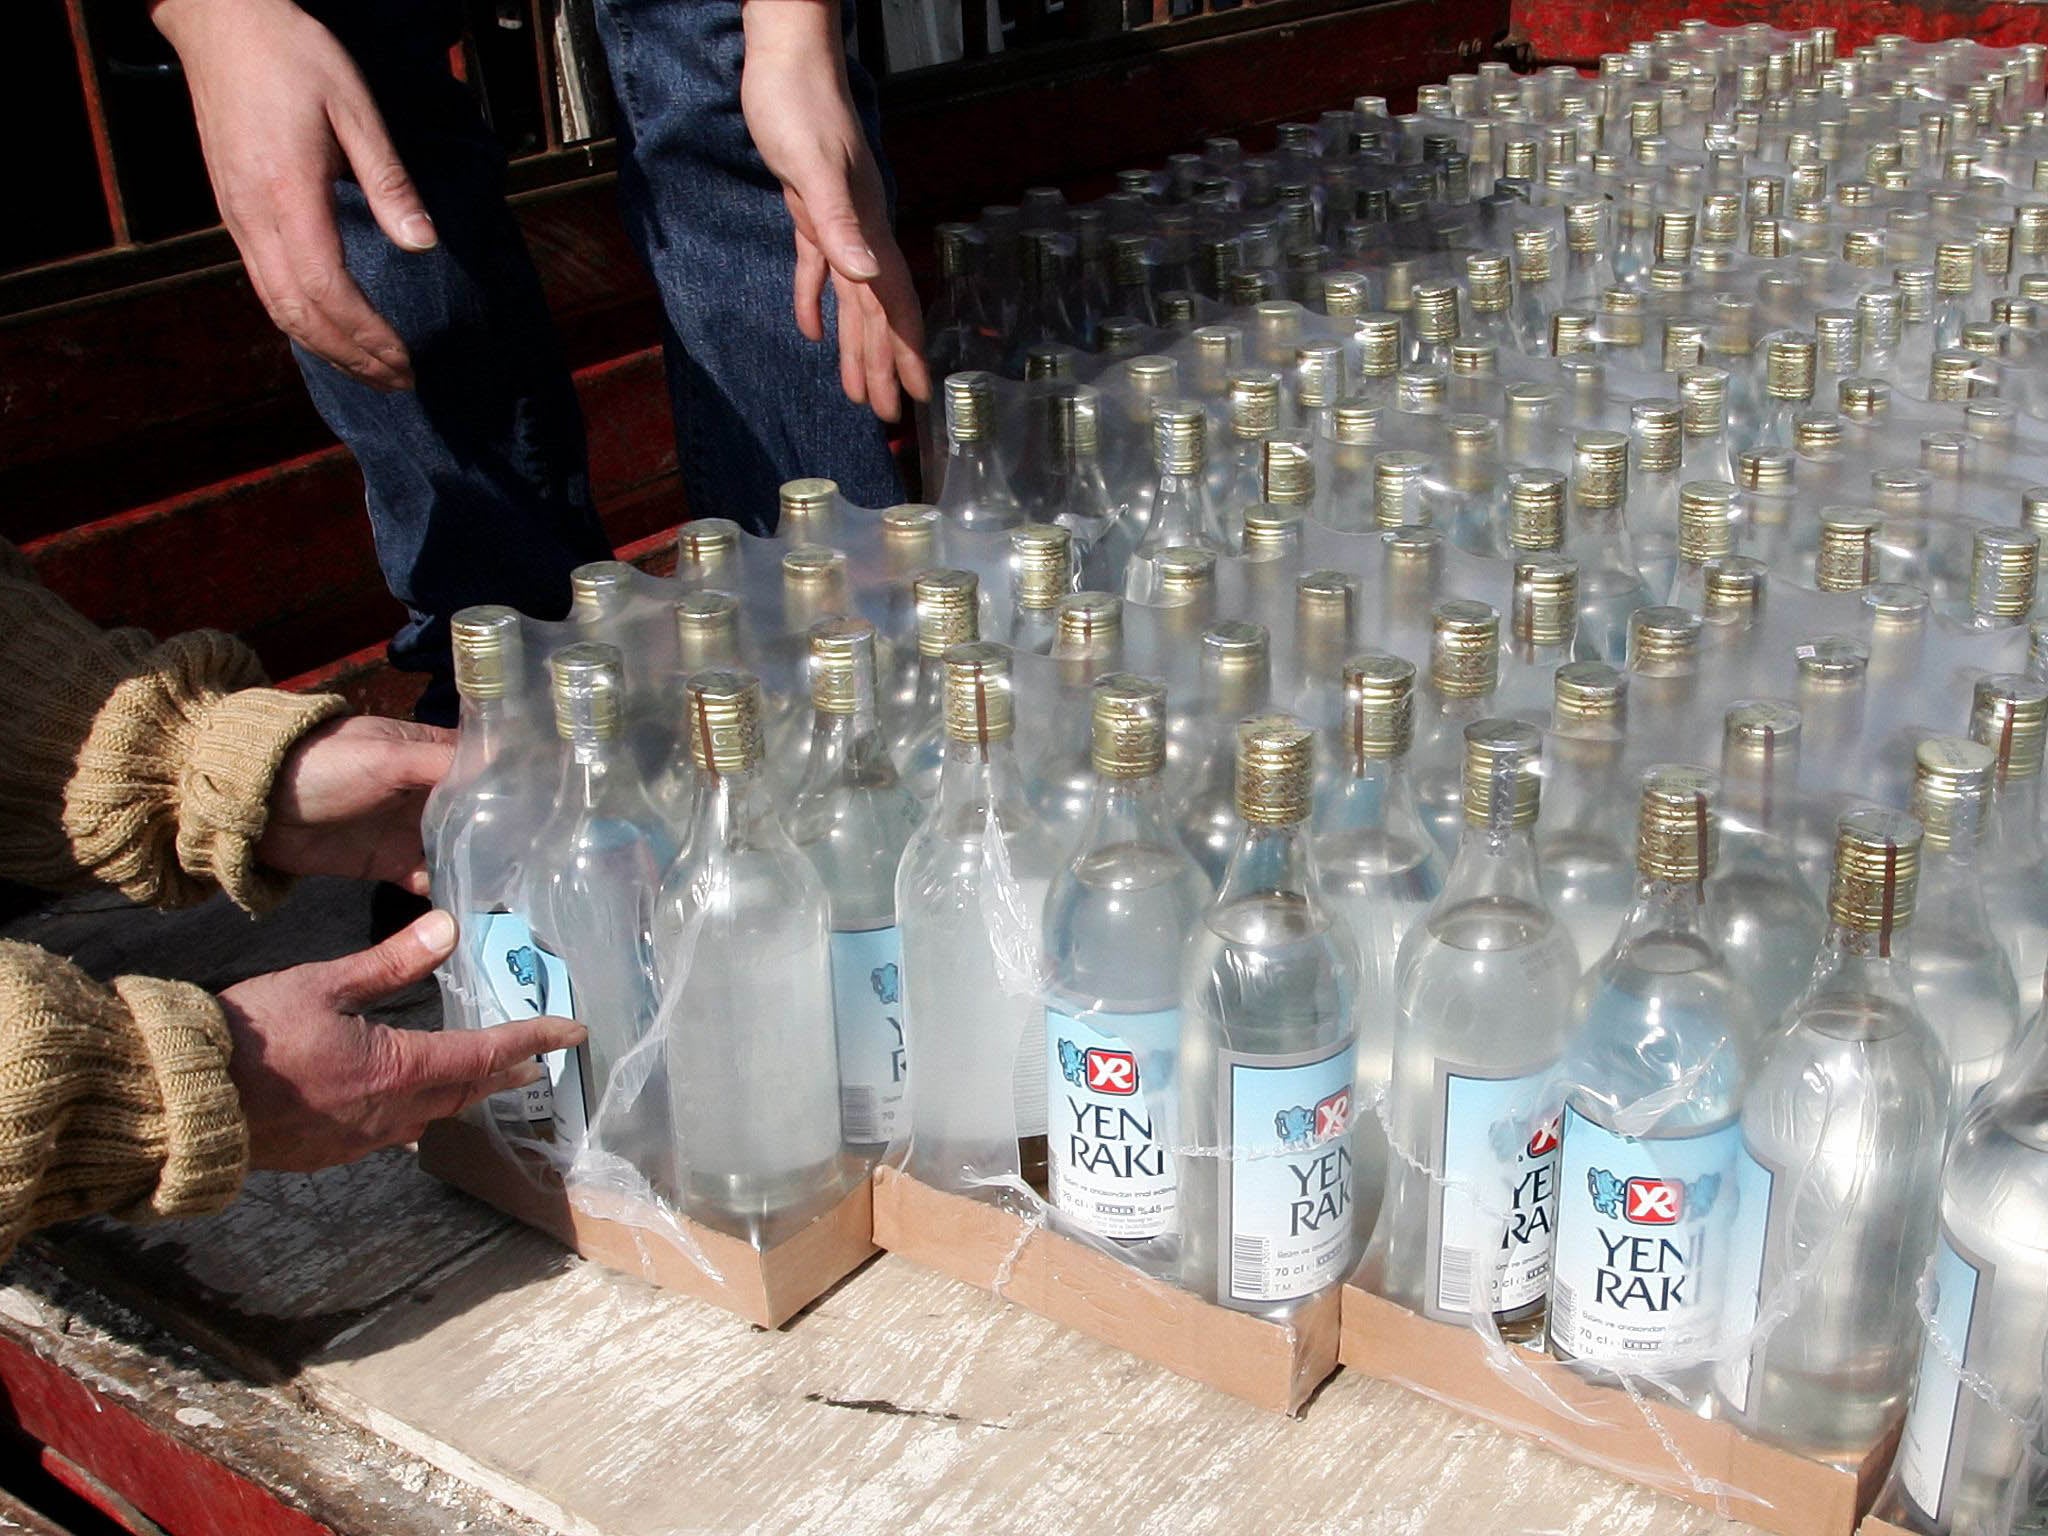 The tax on raki, an anise-flavored spirit, has leapt by 443 per cent in the past decade